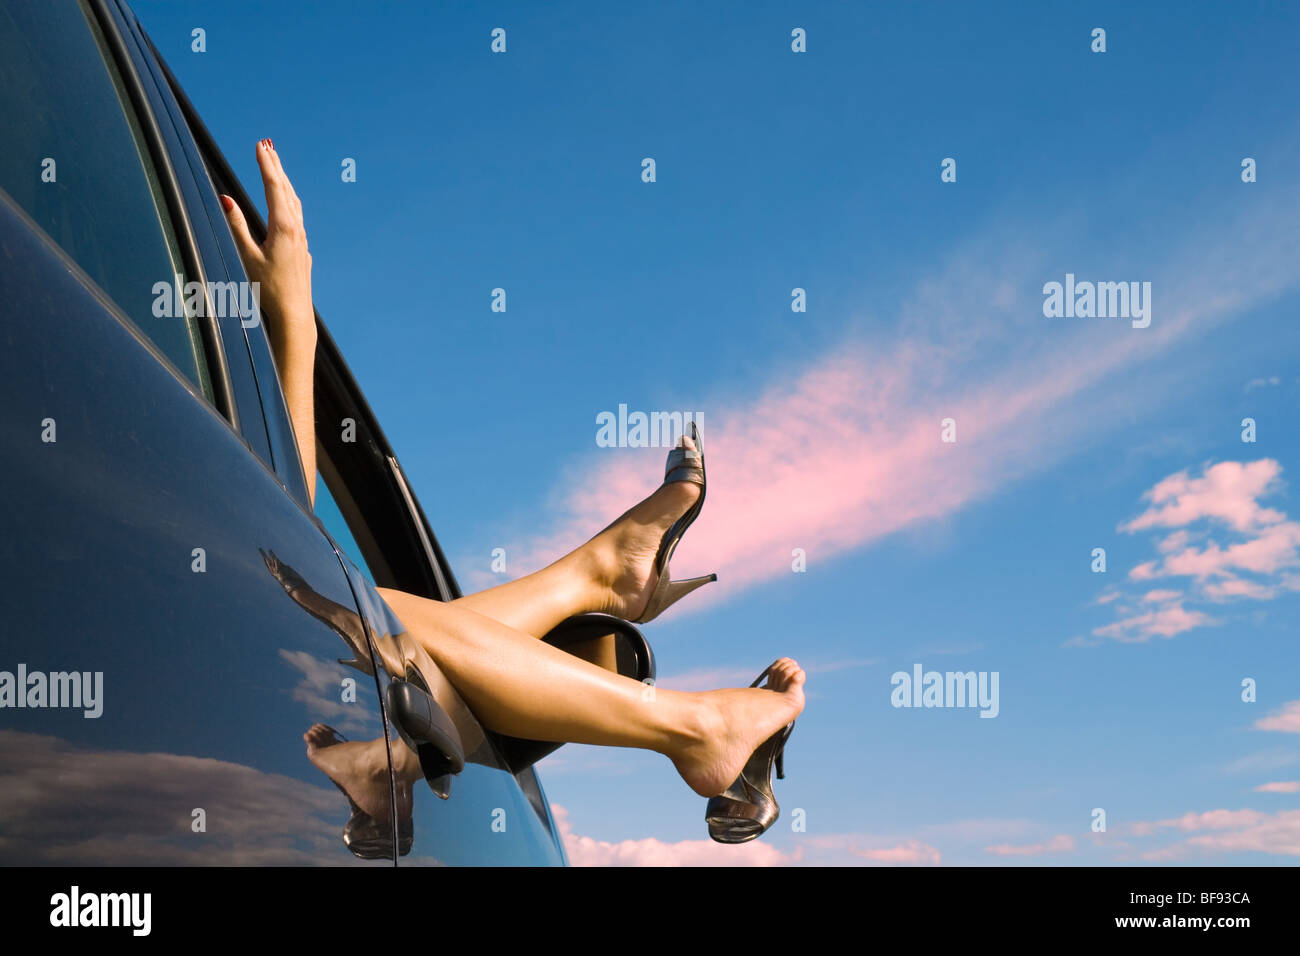 Woman's legs and feet wearing silver high heeled shoes sticking out of car window. Stock Photo